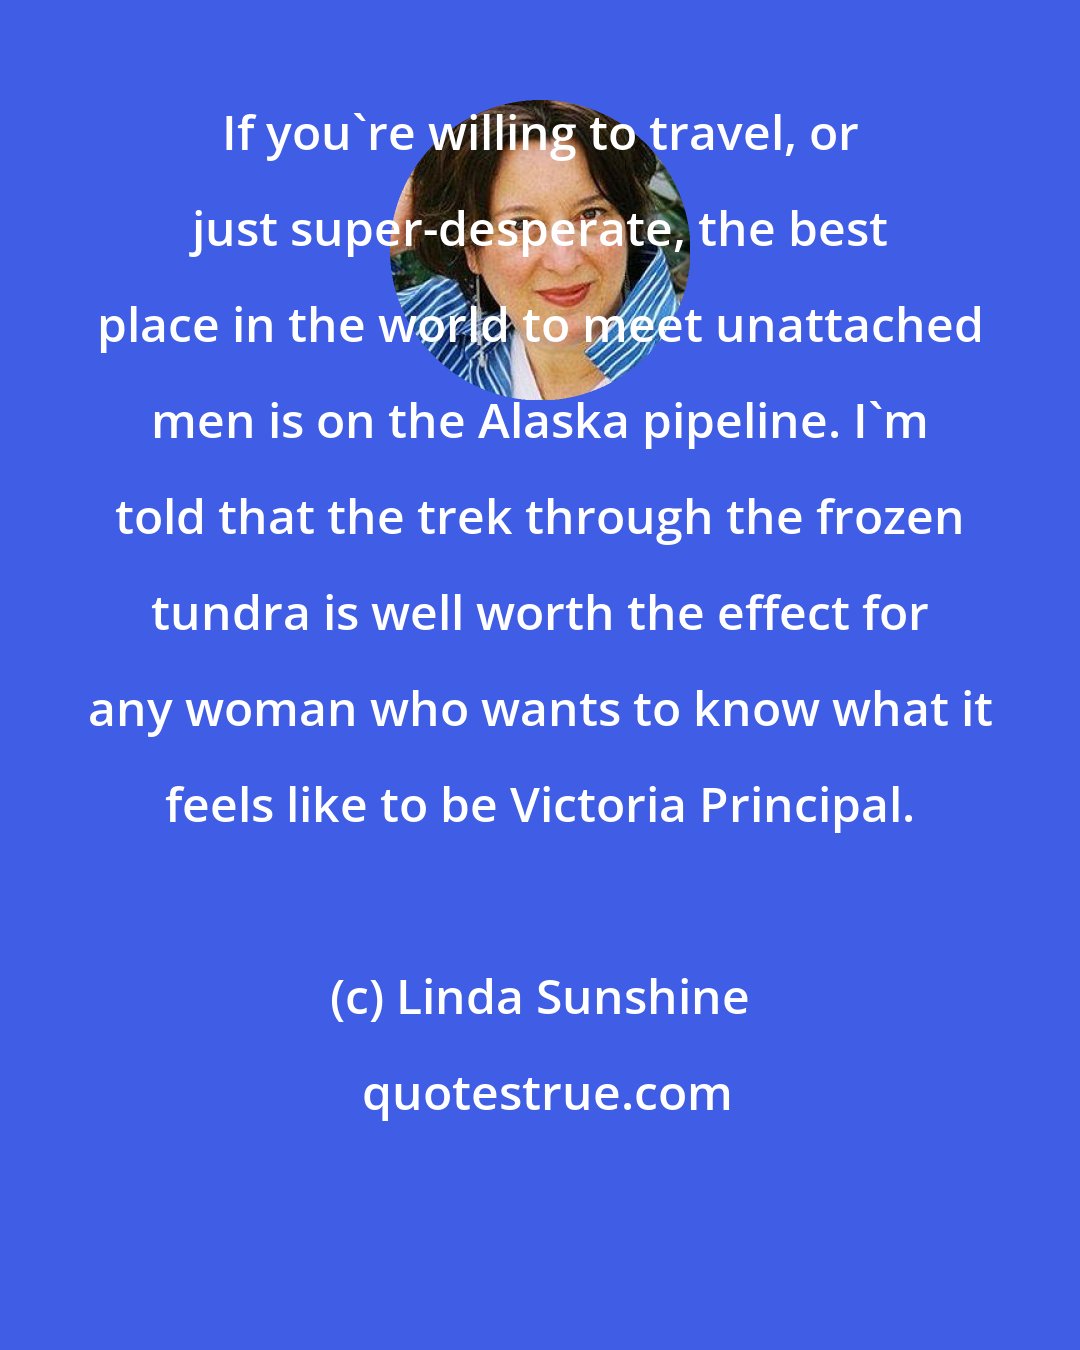 Linda Sunshine: If you're willing to travel, or just super-desperate, the best place in the world to meet unattached men is on the Alaska pipeline. I'm told that the trek through the frozen tundra is well worth the effect for any woman who wants to know what it feels like to be Victoria Principal.